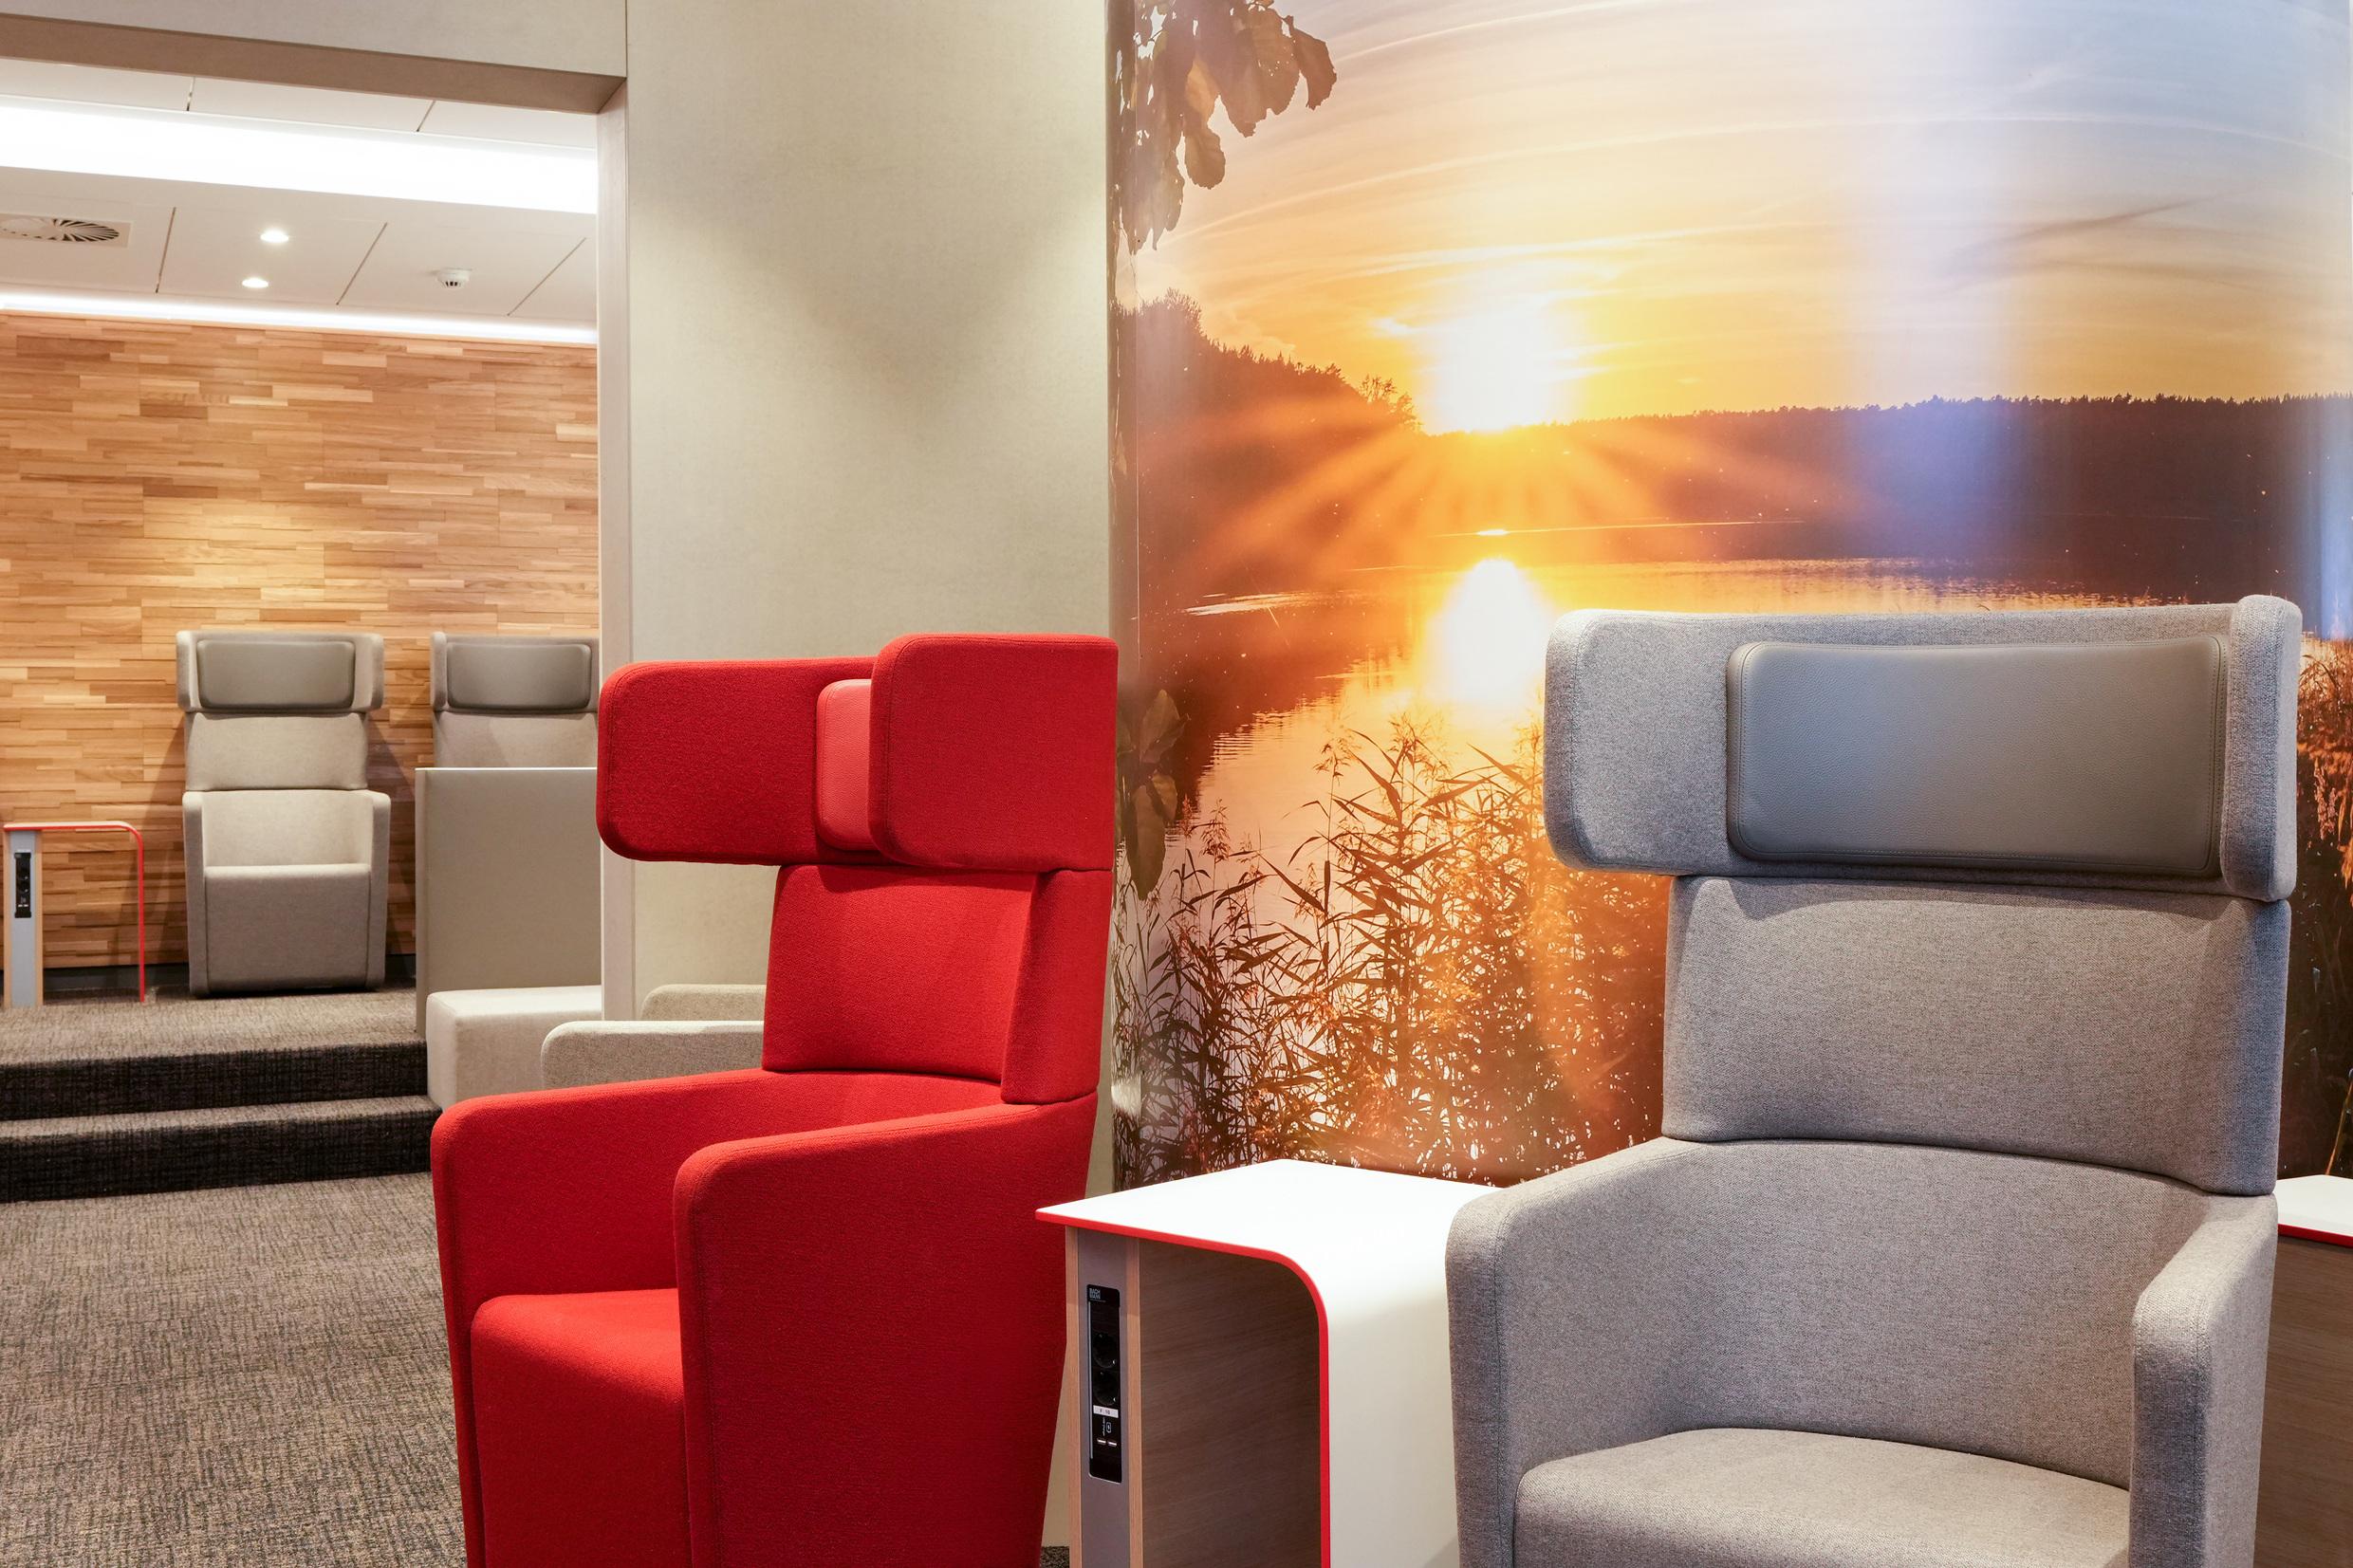 Red and grey armchair in front of a photo of a sunset in a DB Lounge.